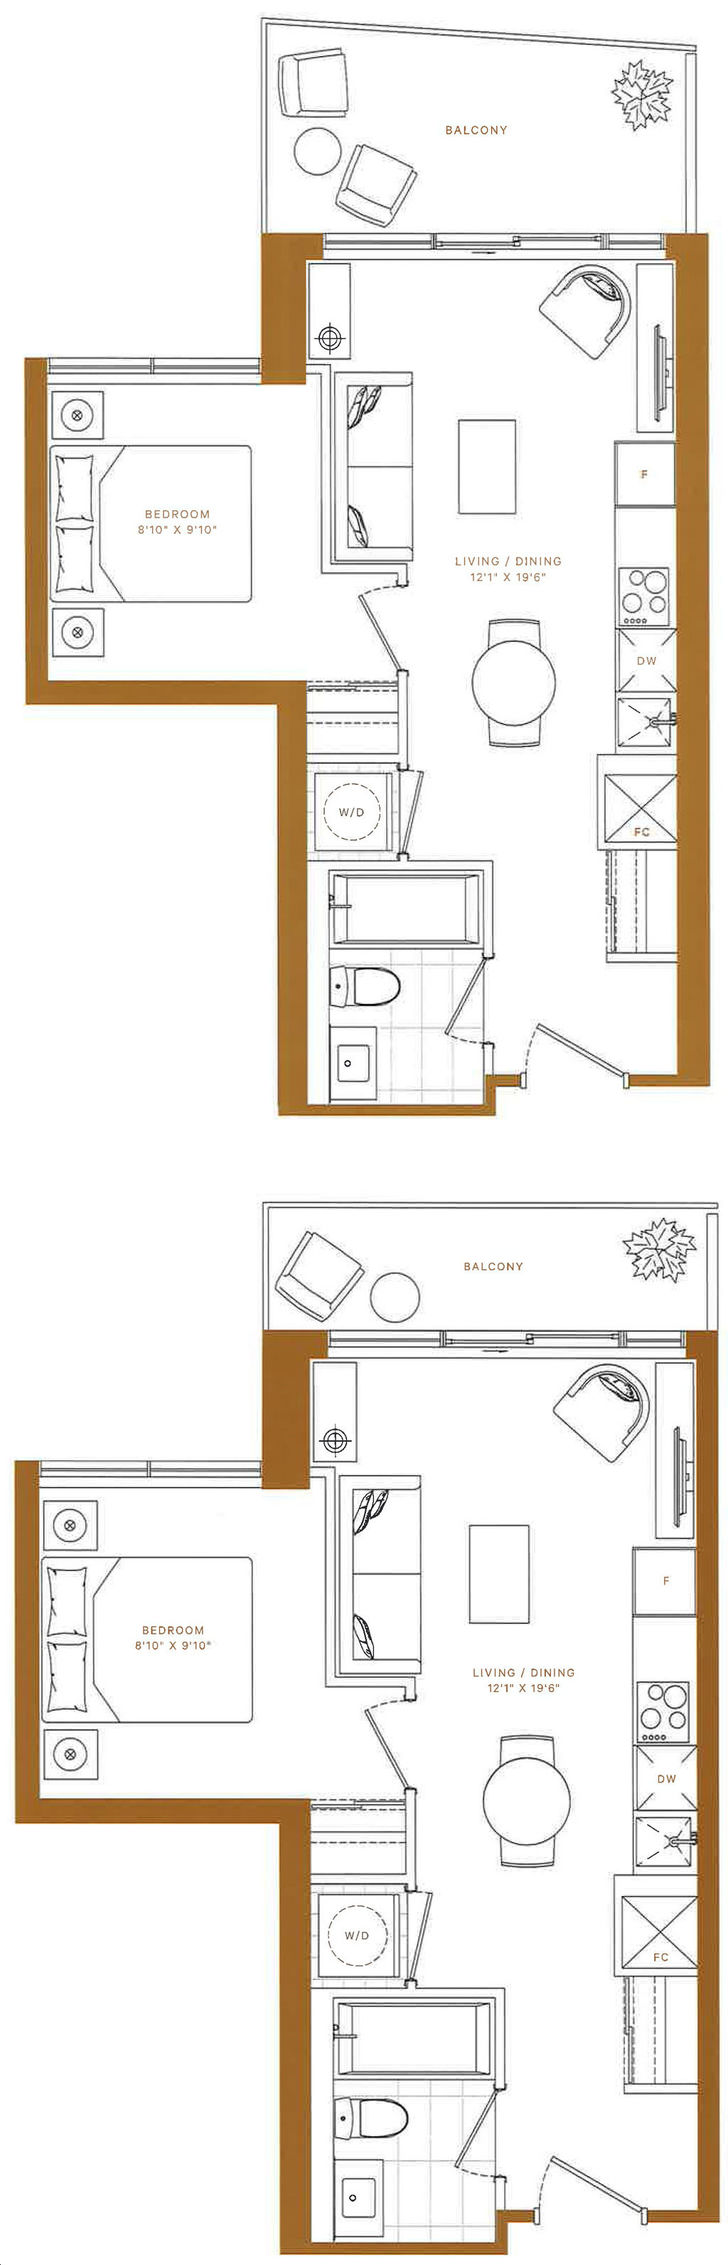 Line 5 Condos South Tower by Reserve T.06 Floorplan 1 bed